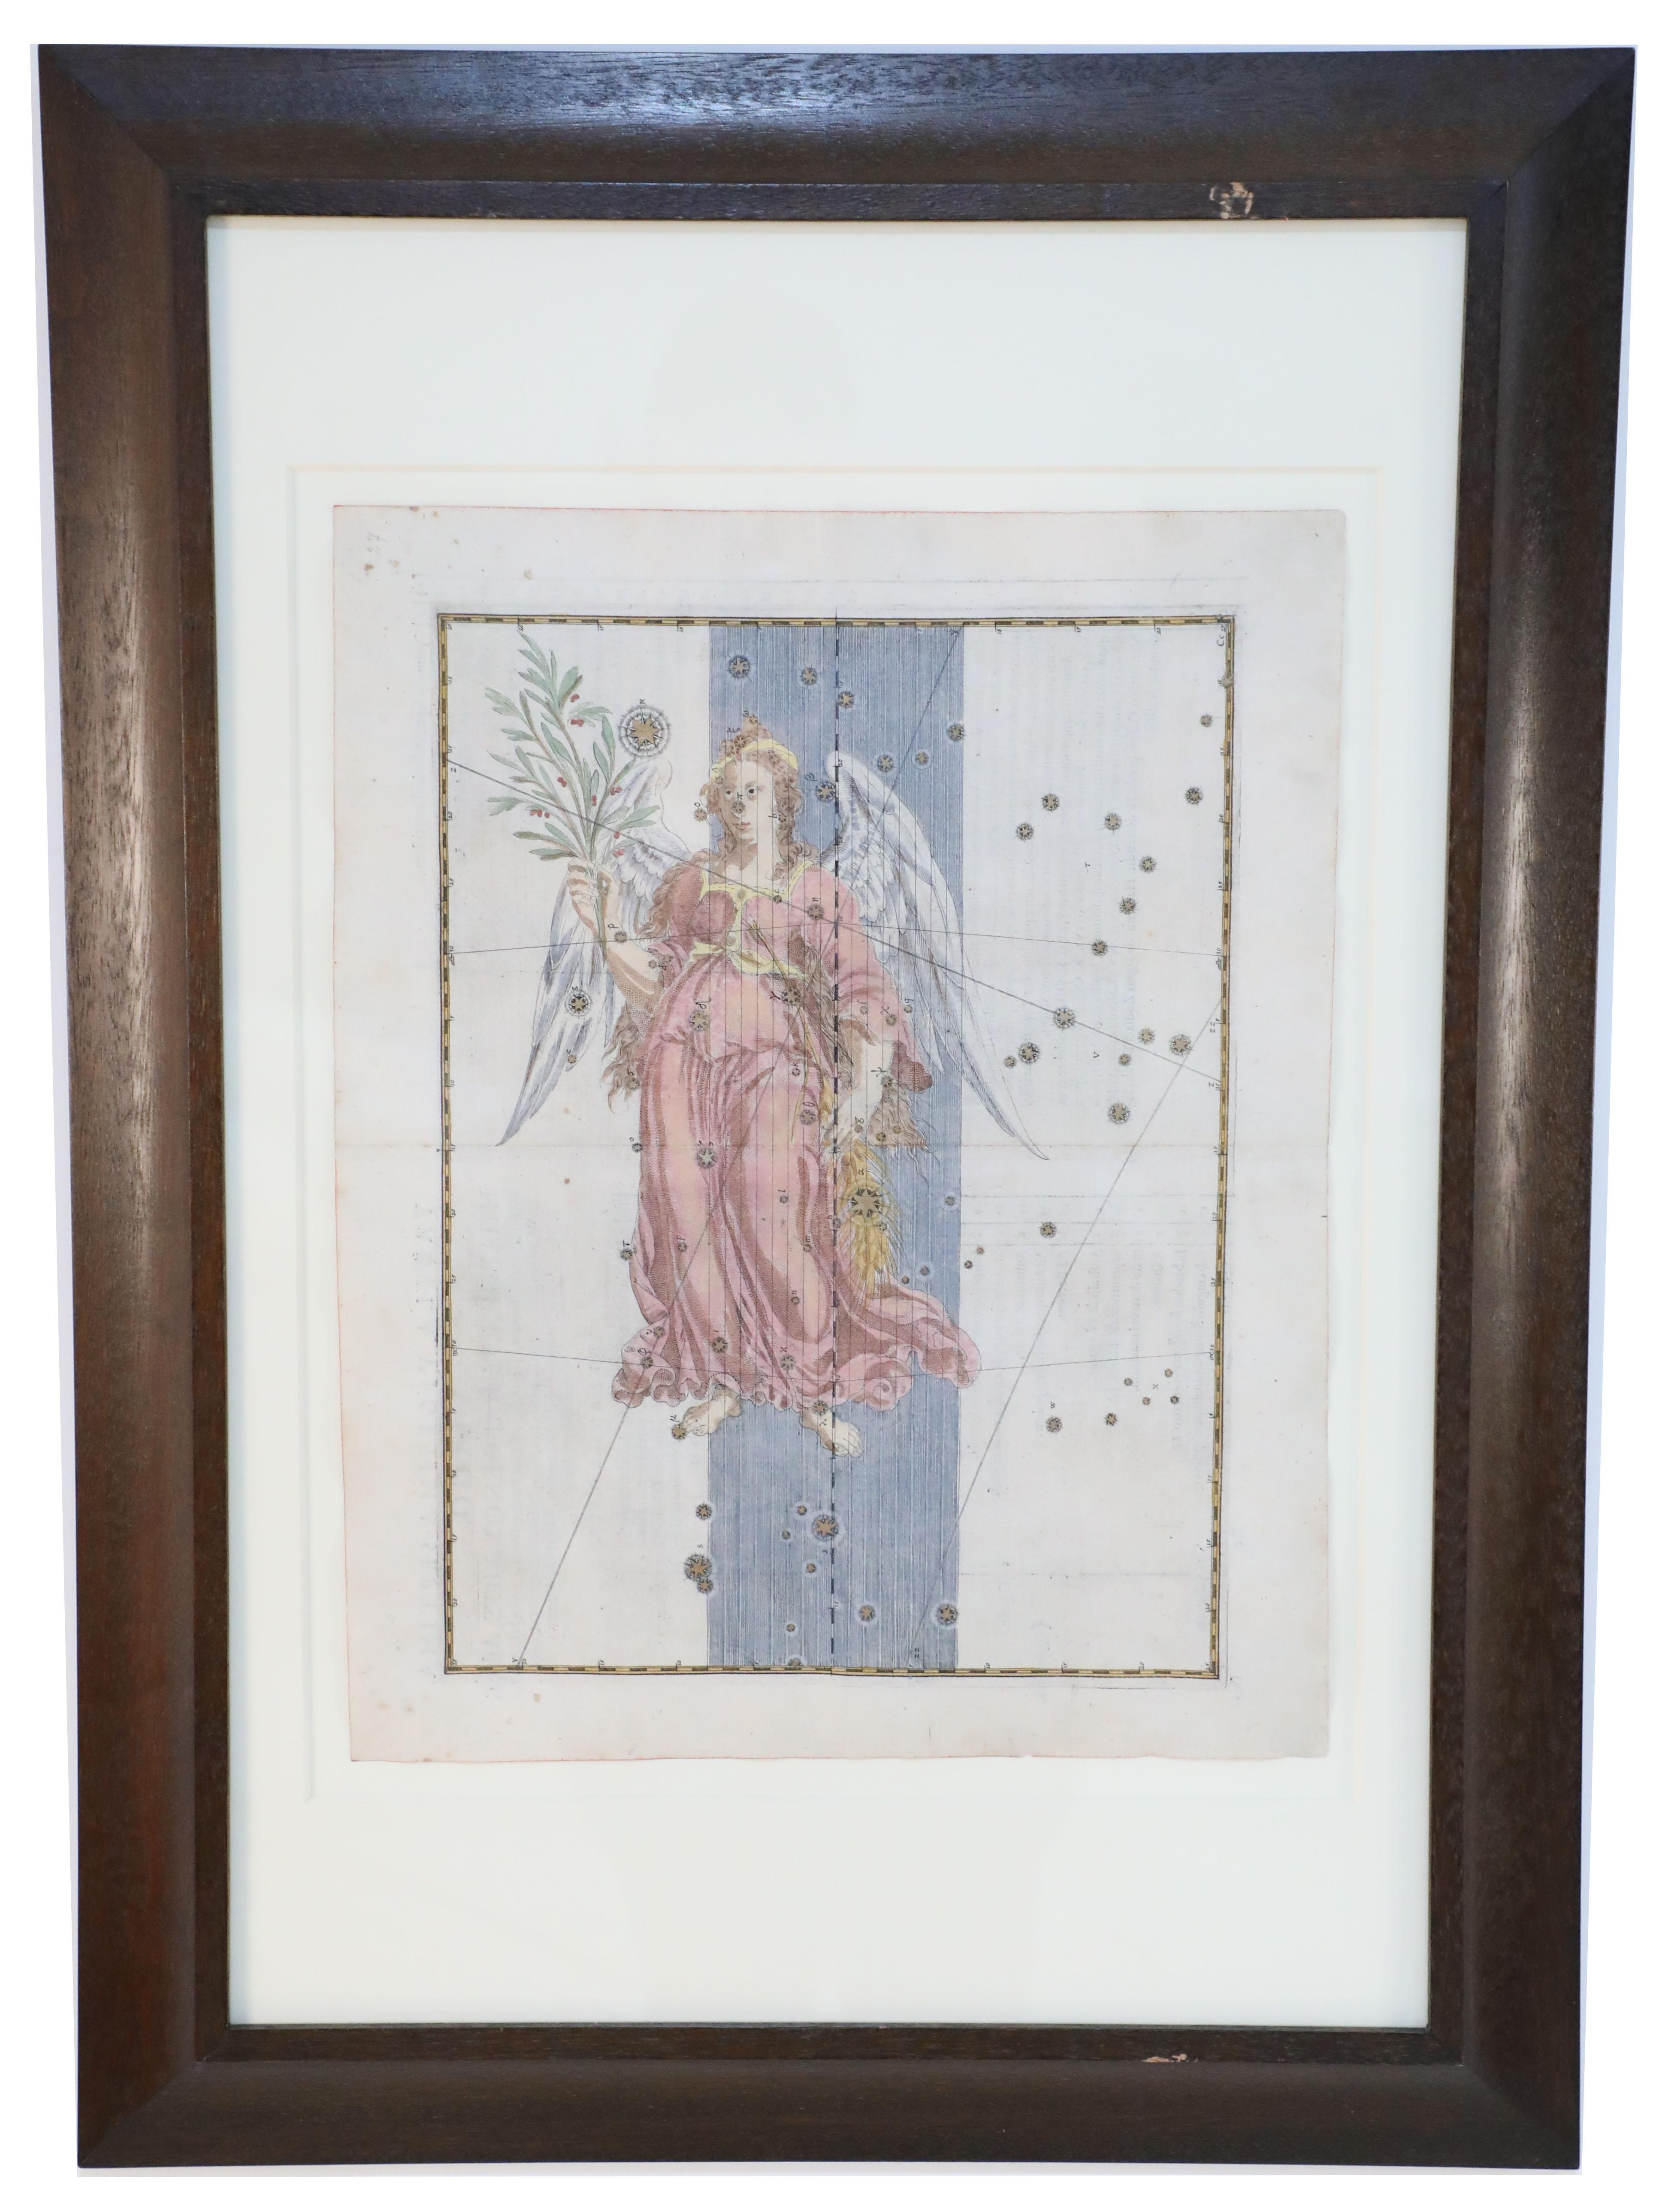 Alexander Mair Renaissance Hand-Colored Engravings of Astronomy Star Charts For Sale 7